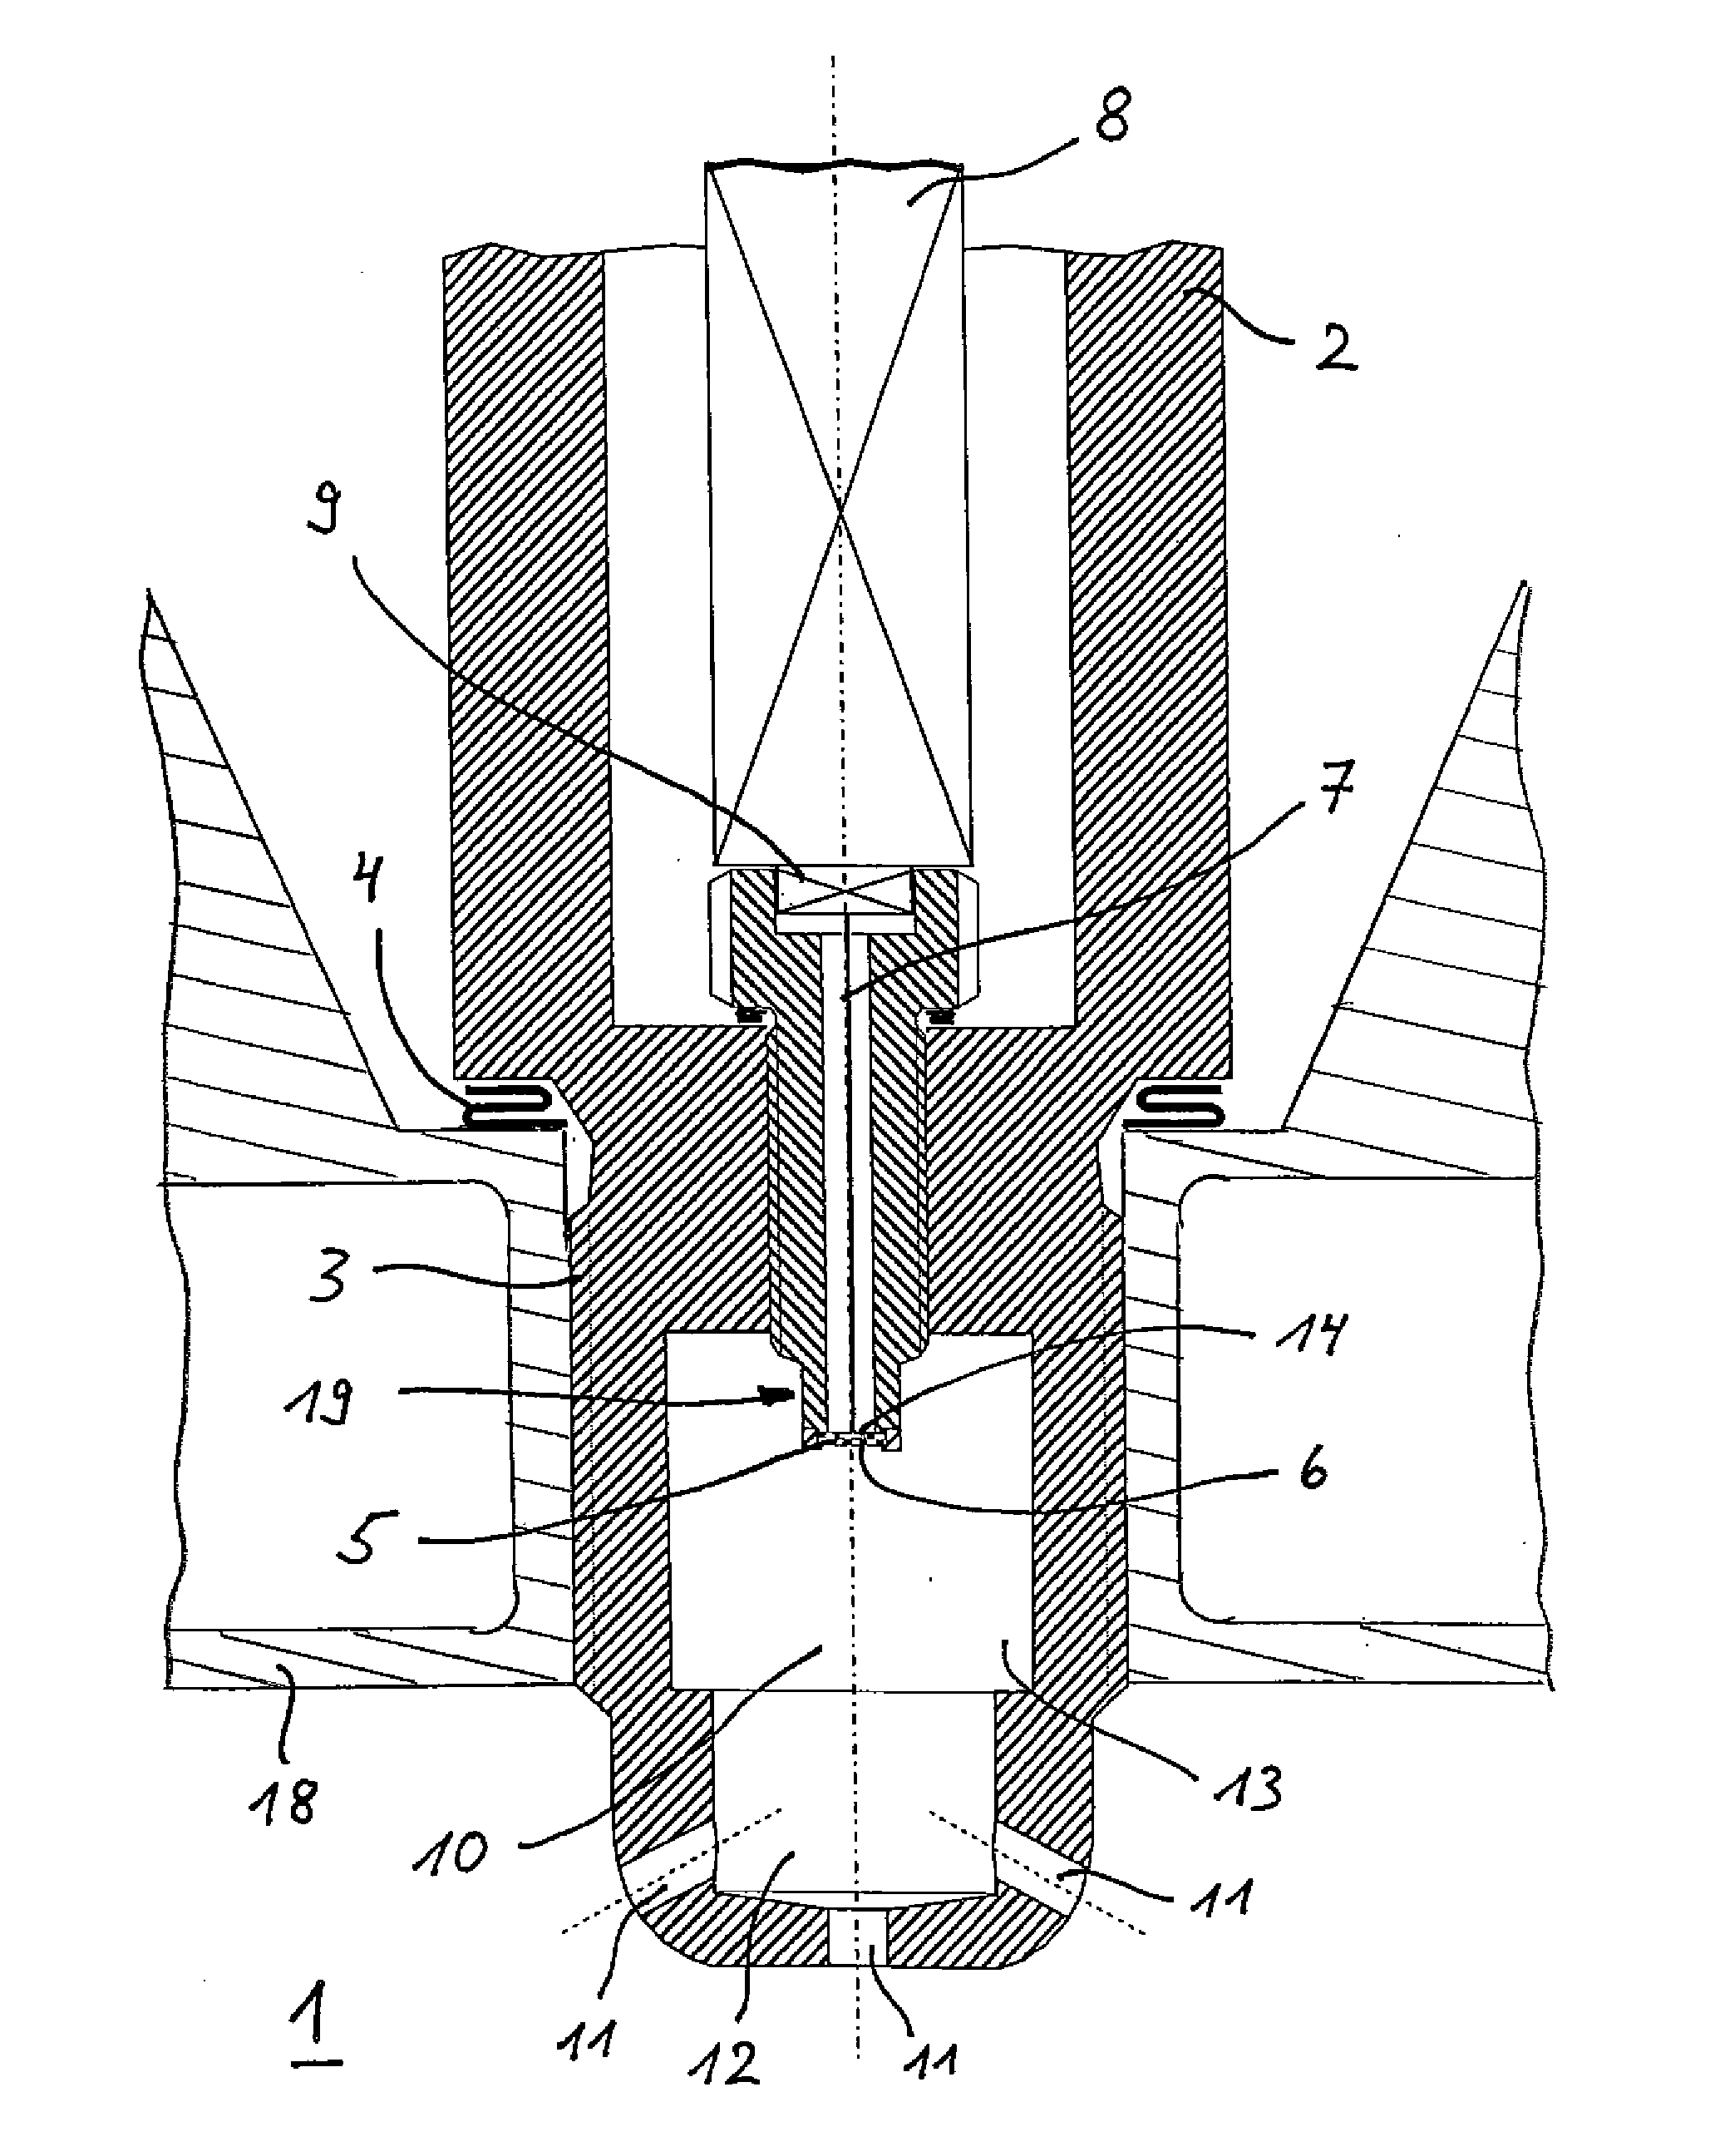 Laser ignition for gas mixtures